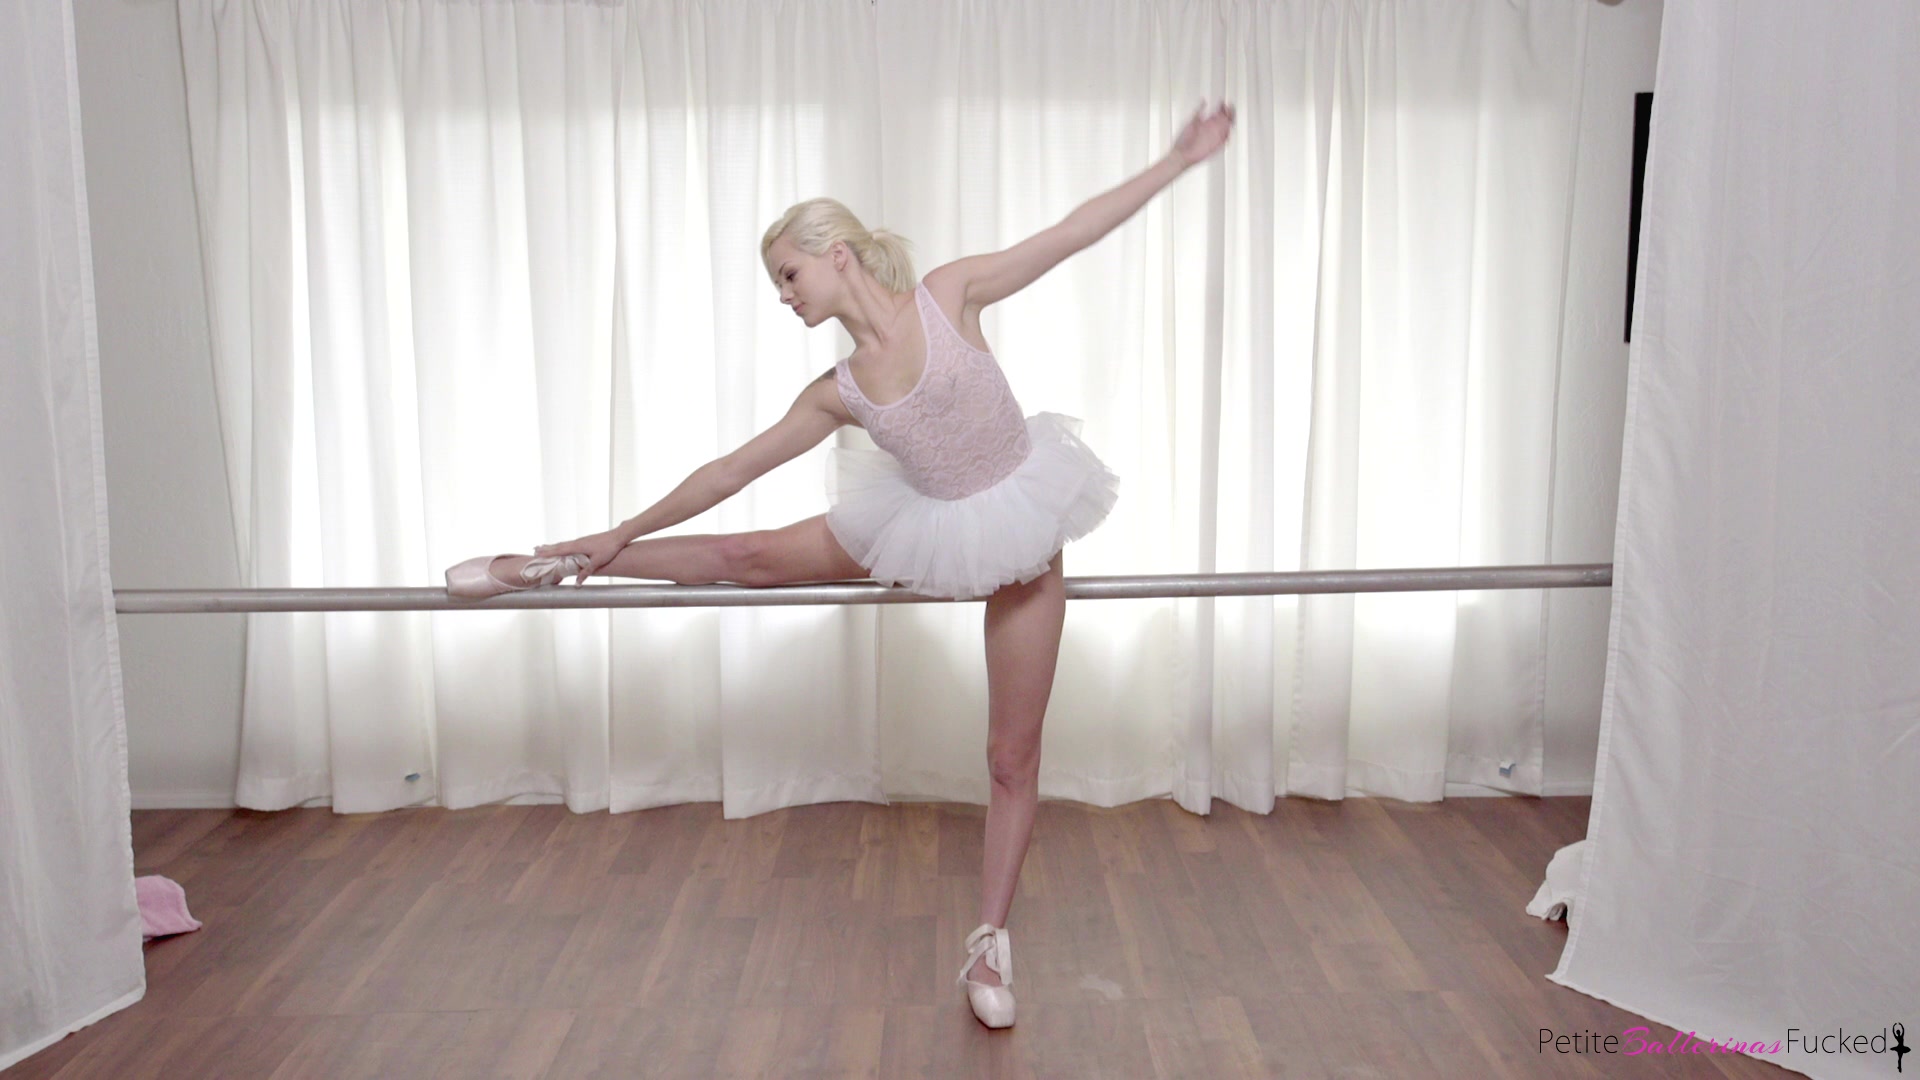 Tiny Blonde Teen Elsa Jean Gives Her Ballet Instructor A Stiffie Ride As He Fucks Her